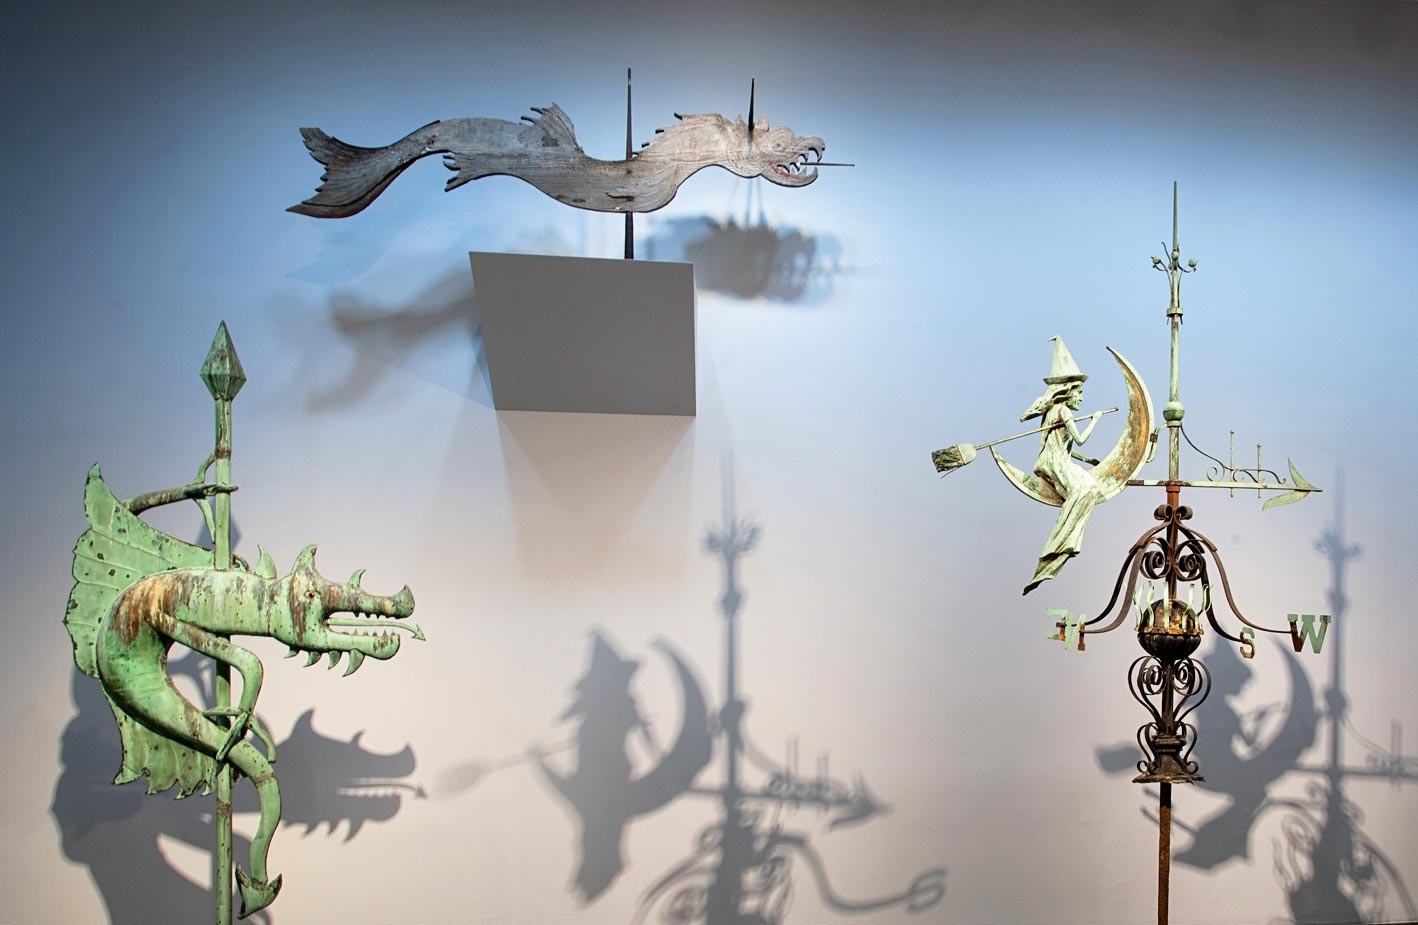 Exhibition American Weathervanes: The Art of the Winds